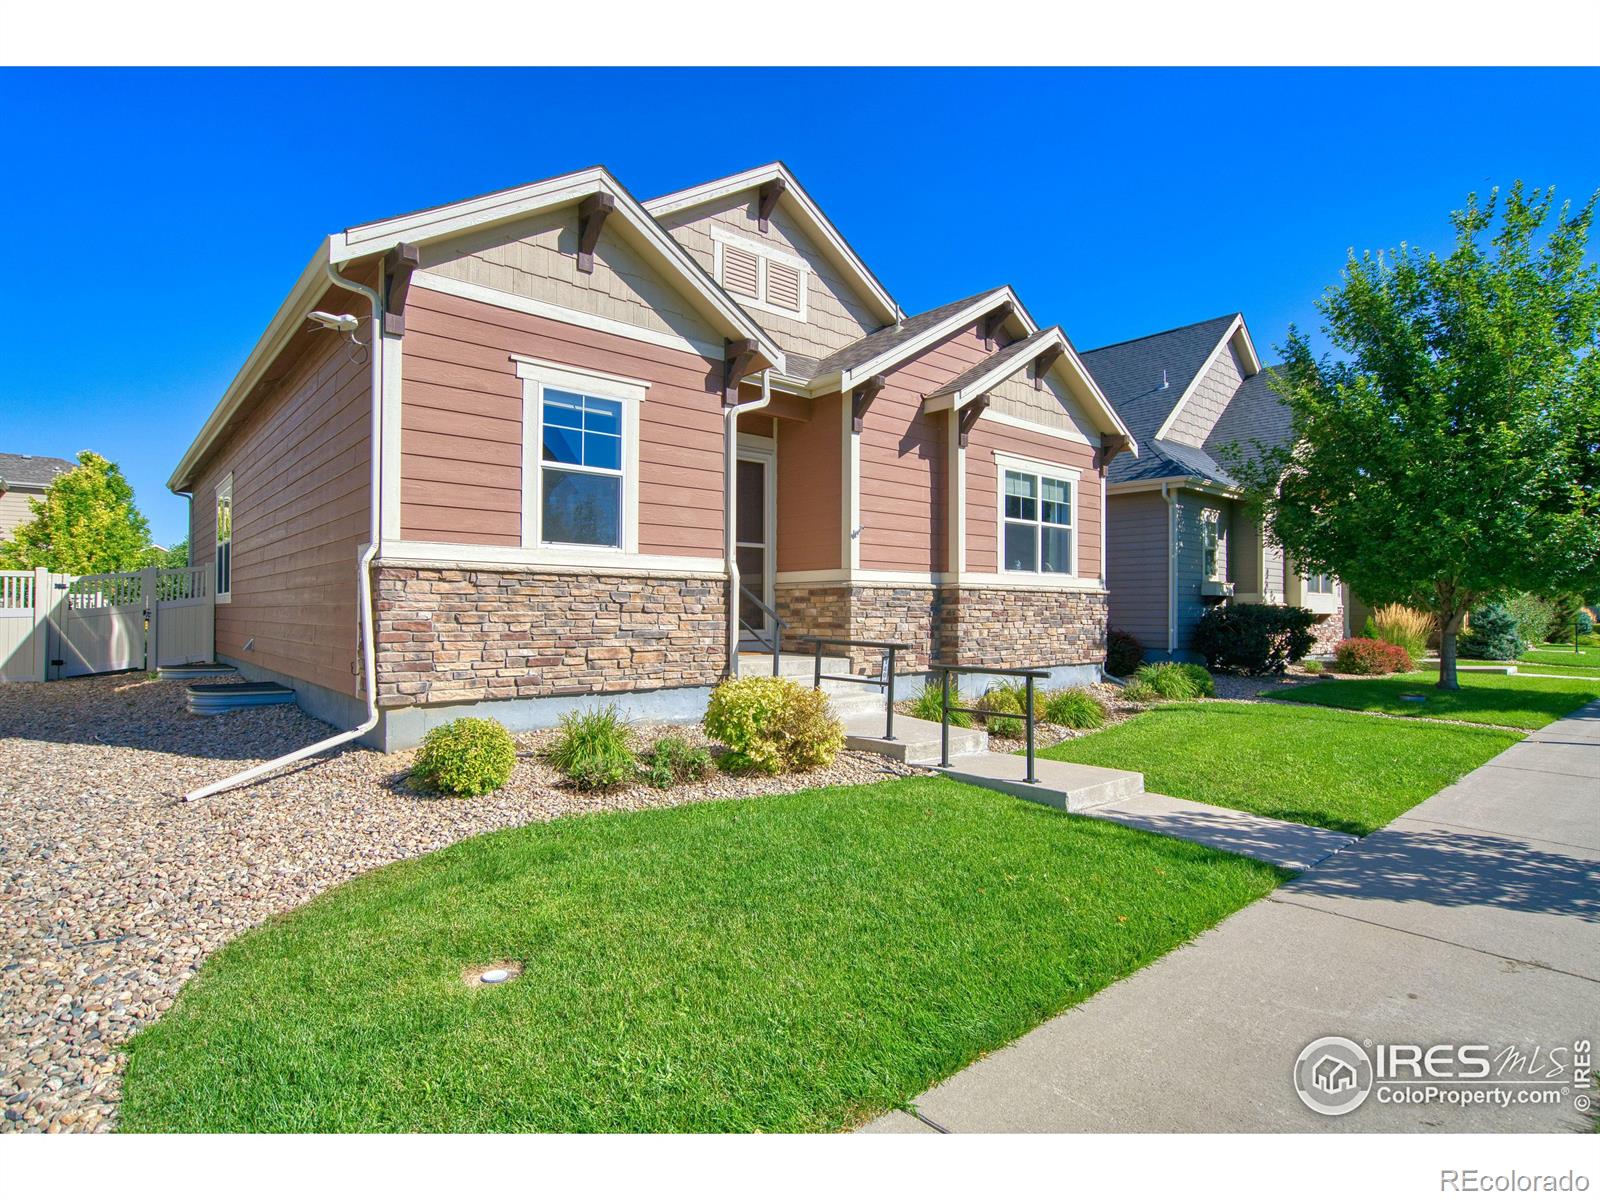 1409  Armstrong Drive, longmont MLS: 123456789994917 Beds: 3 Baths: 3 Price: $640,000